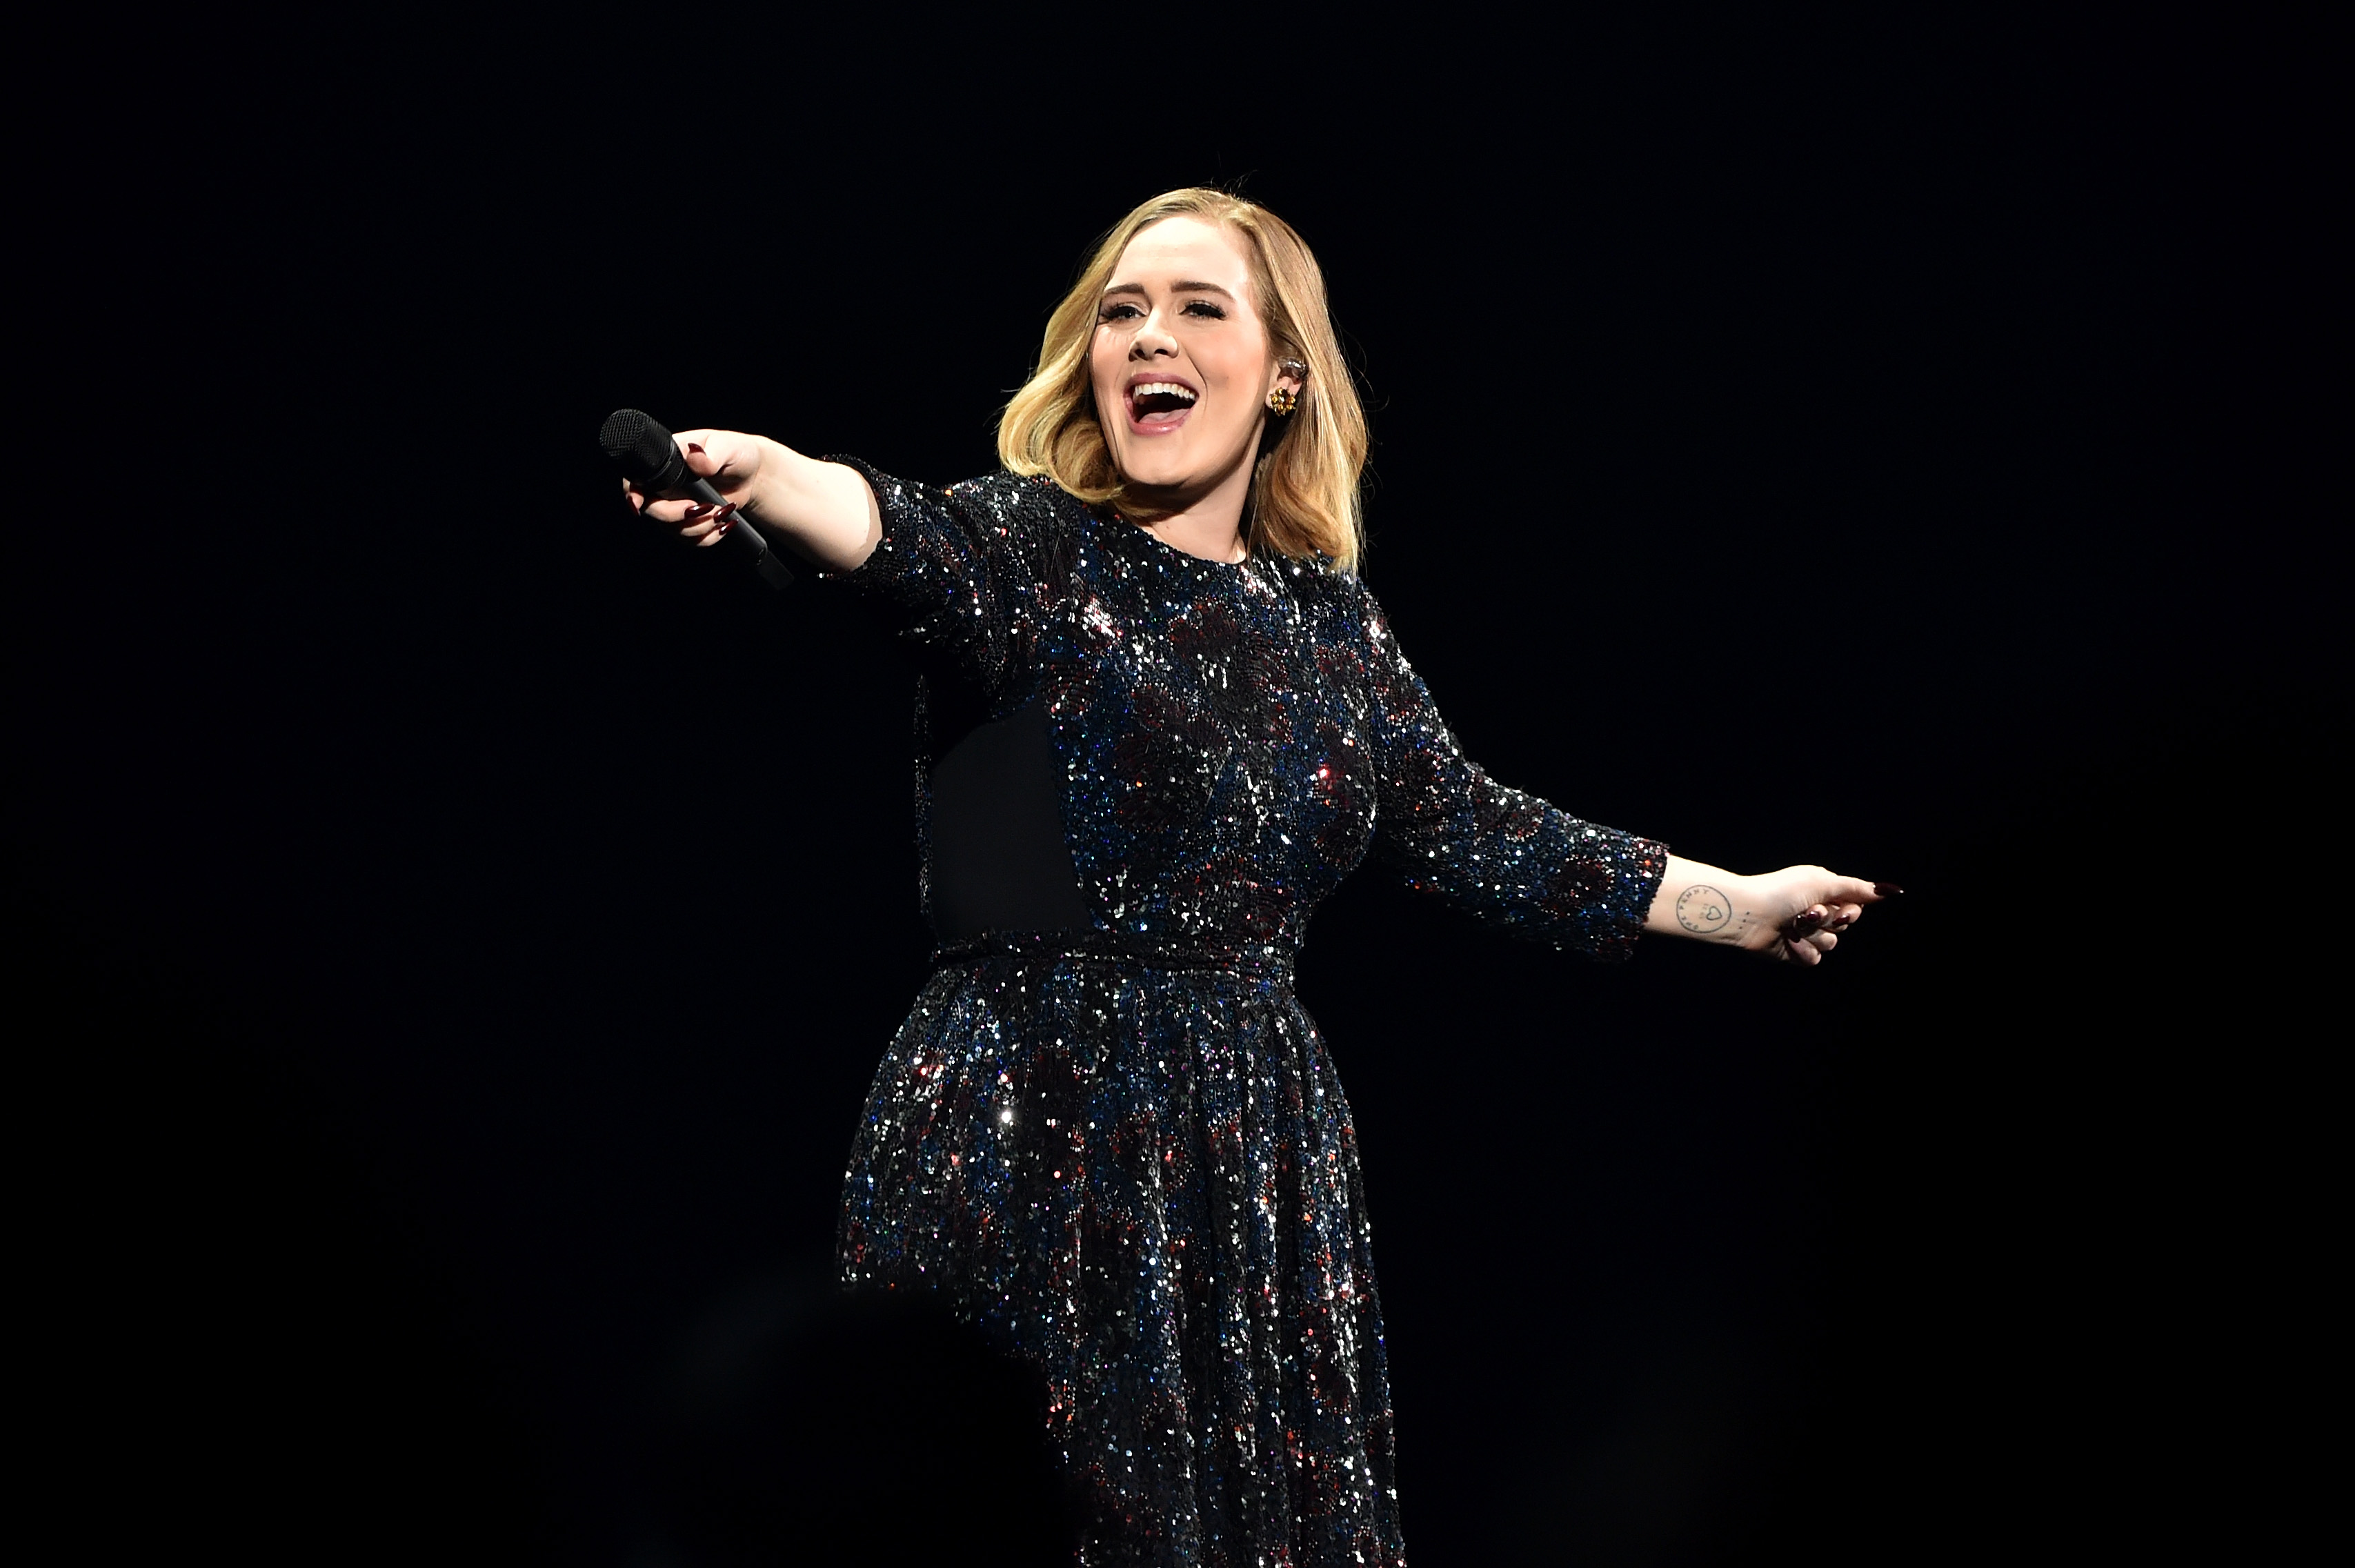 Adele performs at Genting Arena on March 29, 2016 in Birmingham, England. (Gareth Cattermole/Getty Images)